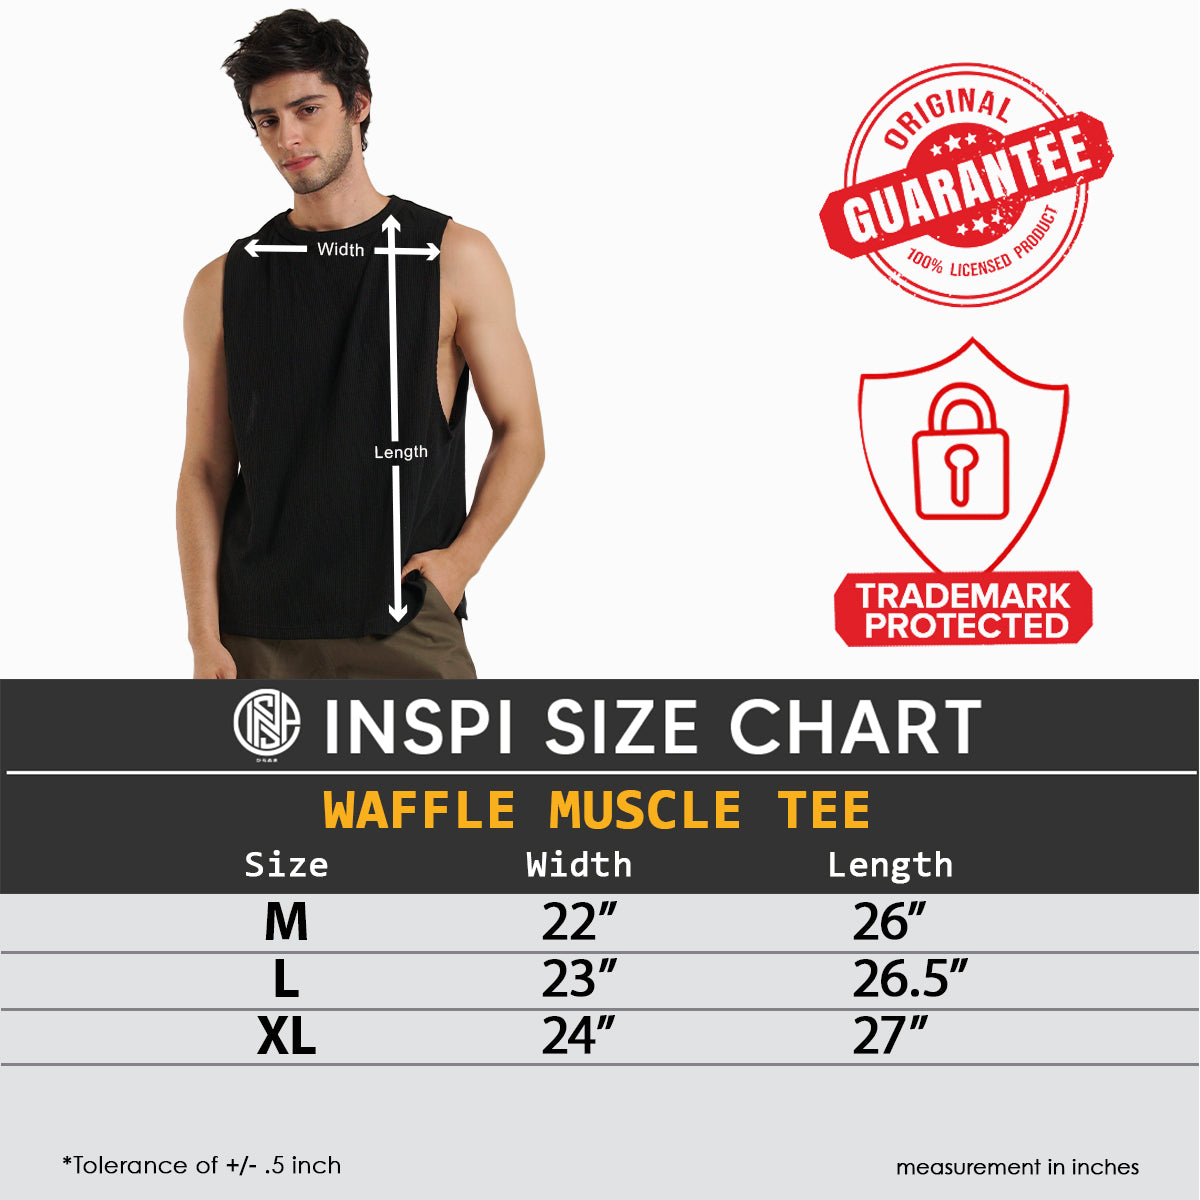 INSPI Waffle Muscle Tee Maroon Sando for Men Plain Sleeveless Tank Top Gym Workout Exercise Beach Outfit